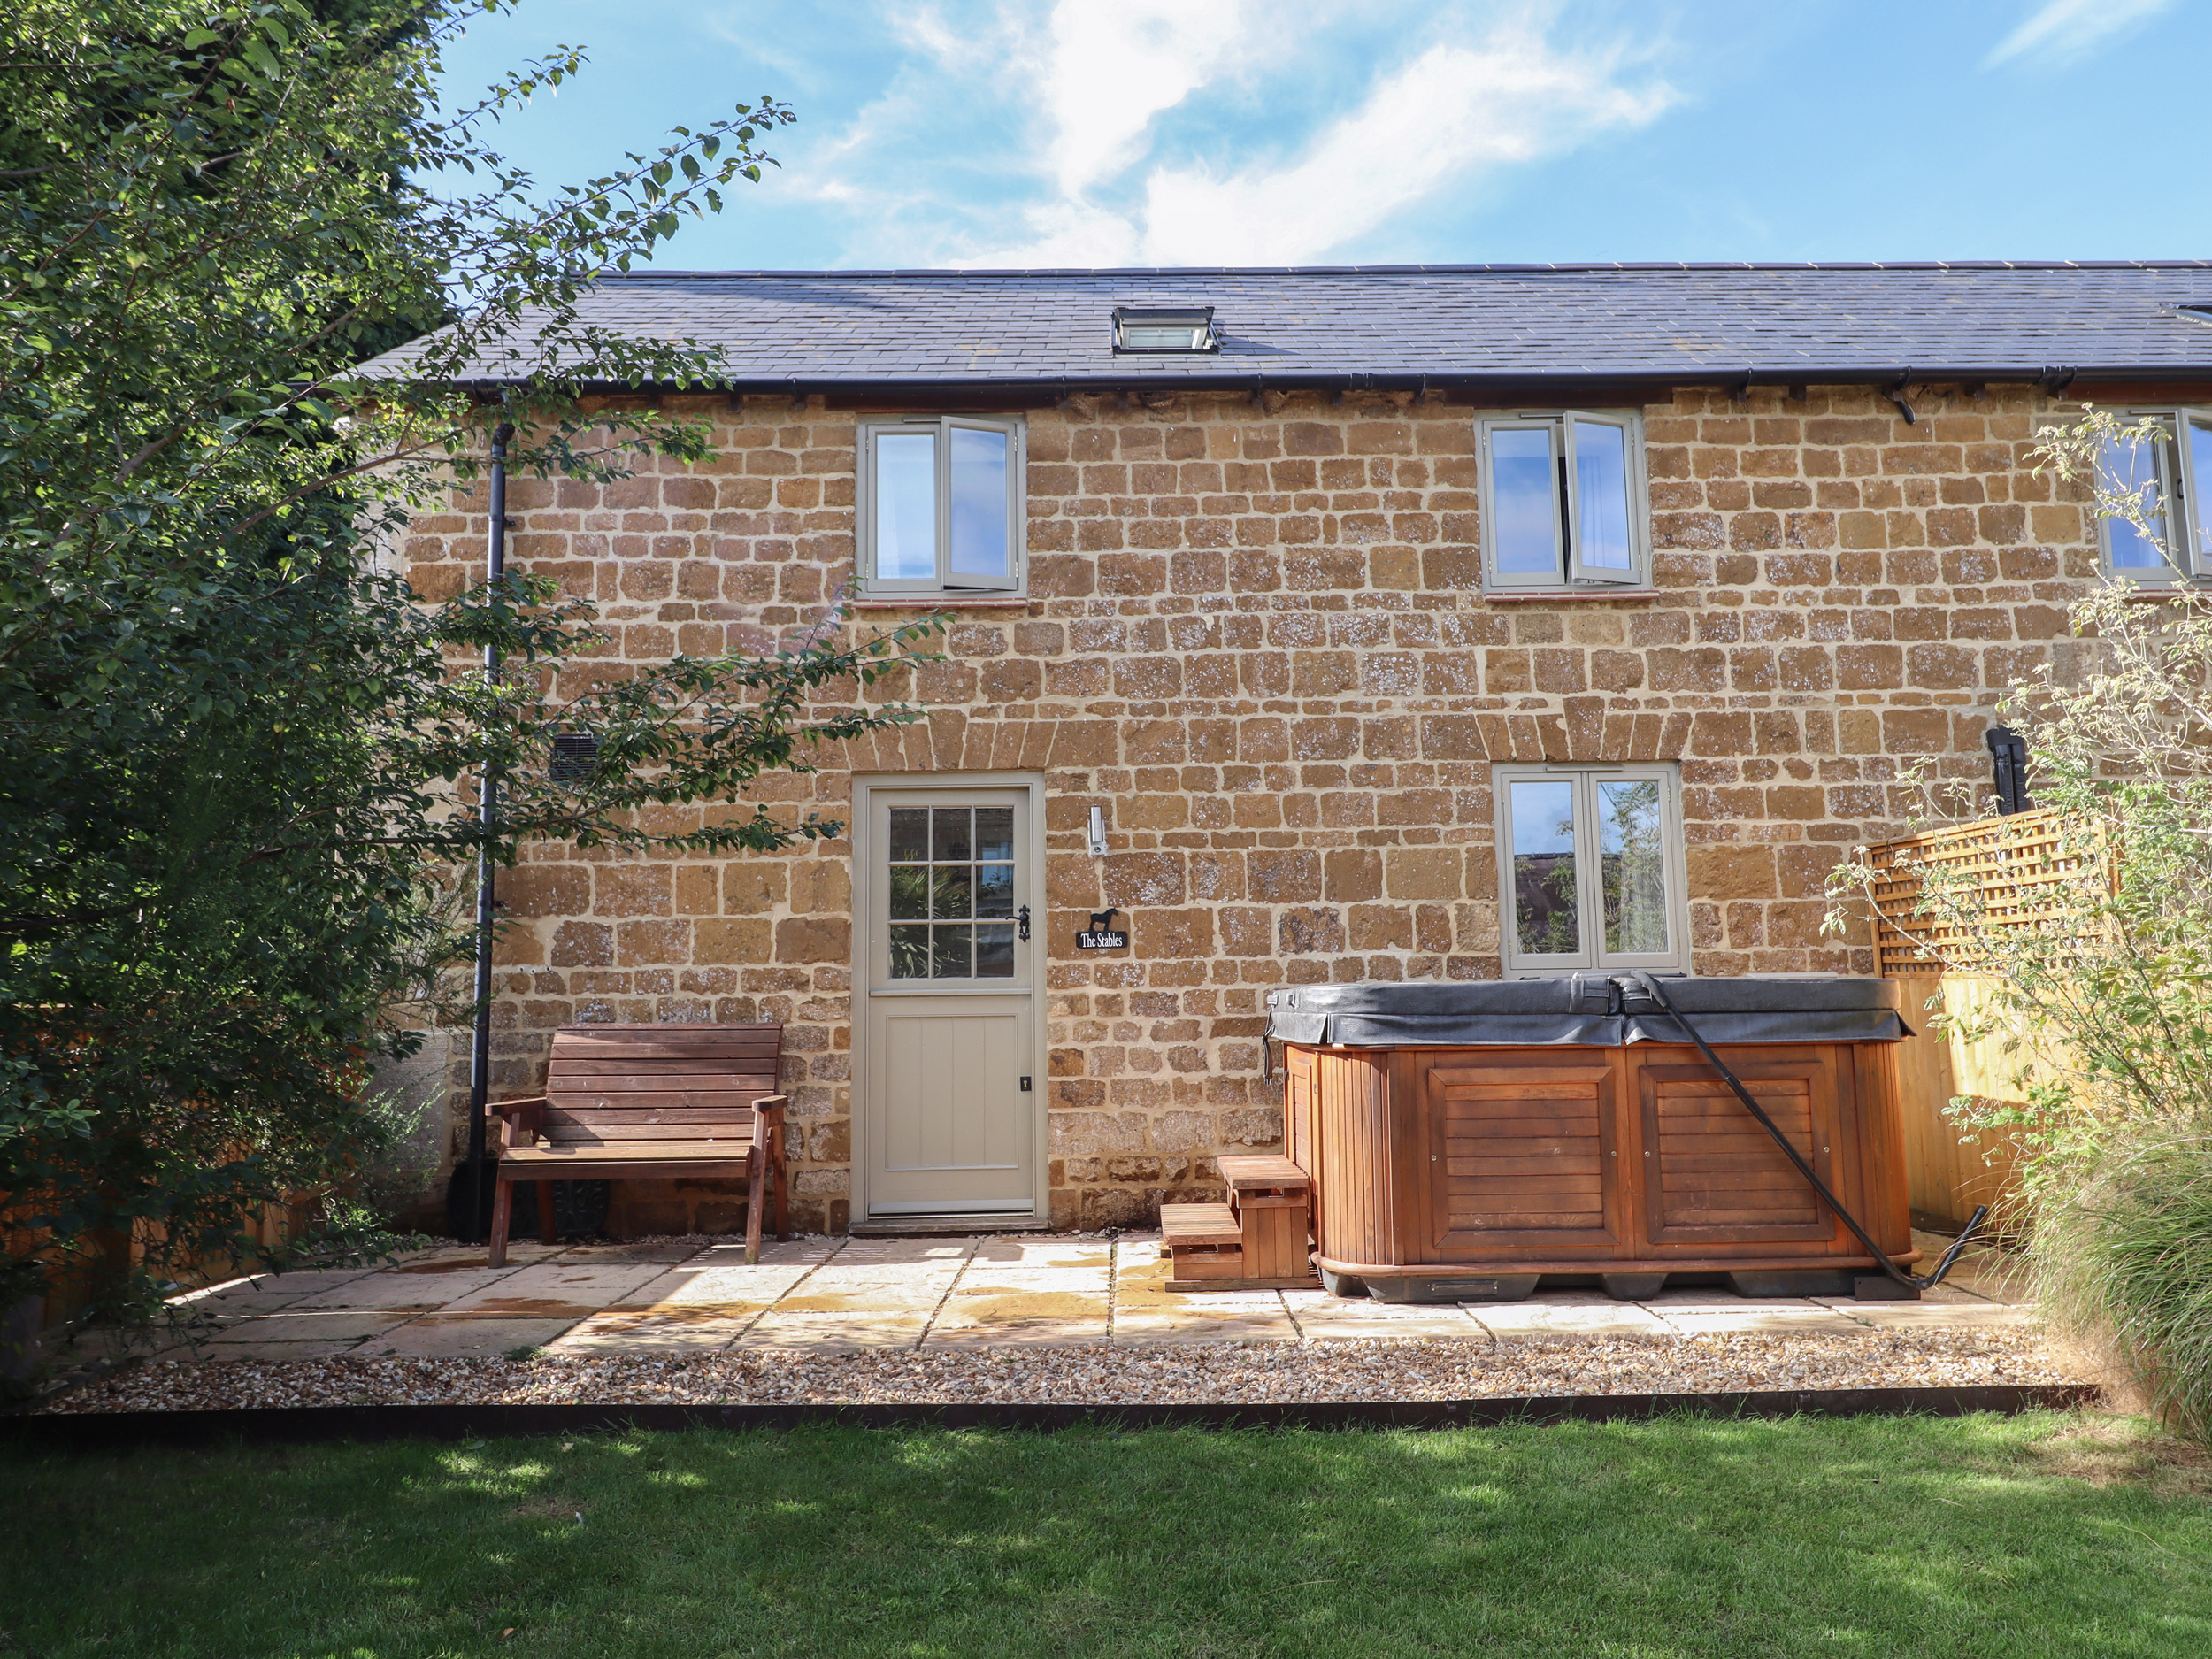 2 bedroom Cottage for rent in Chipping Norton